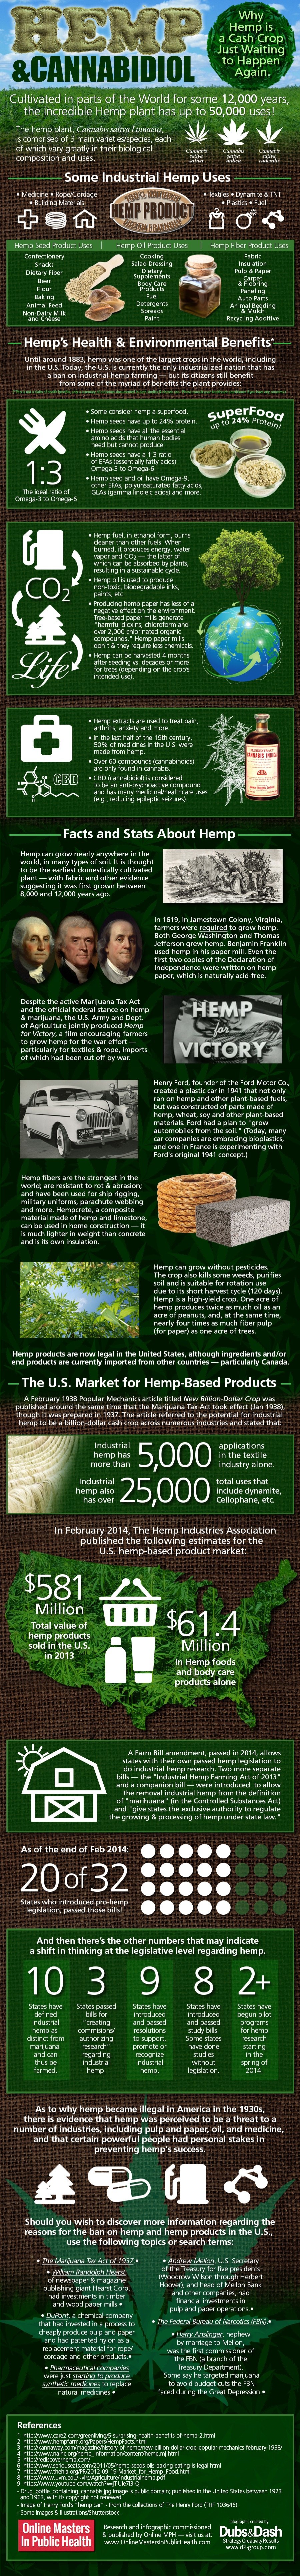 This brilliant infographic covers many of the astounding things hemp can do. Why aren’t we using it more?